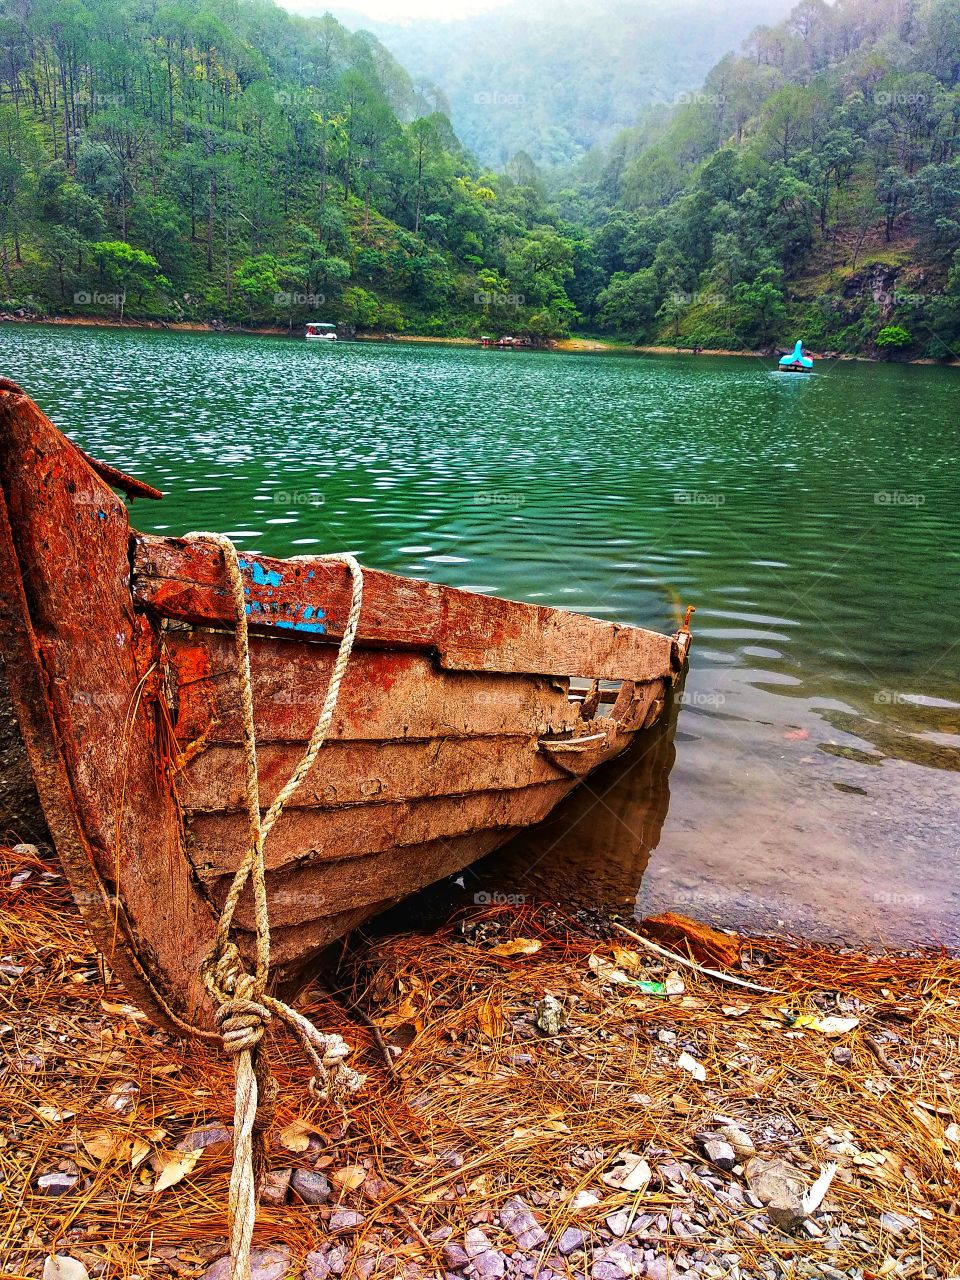 this is wood boat in nainital india.i have clicked this with a nice view when boat in half out of the water and background is too awesome with hills and water. nainital is too good for summer vacation and enjoy life.